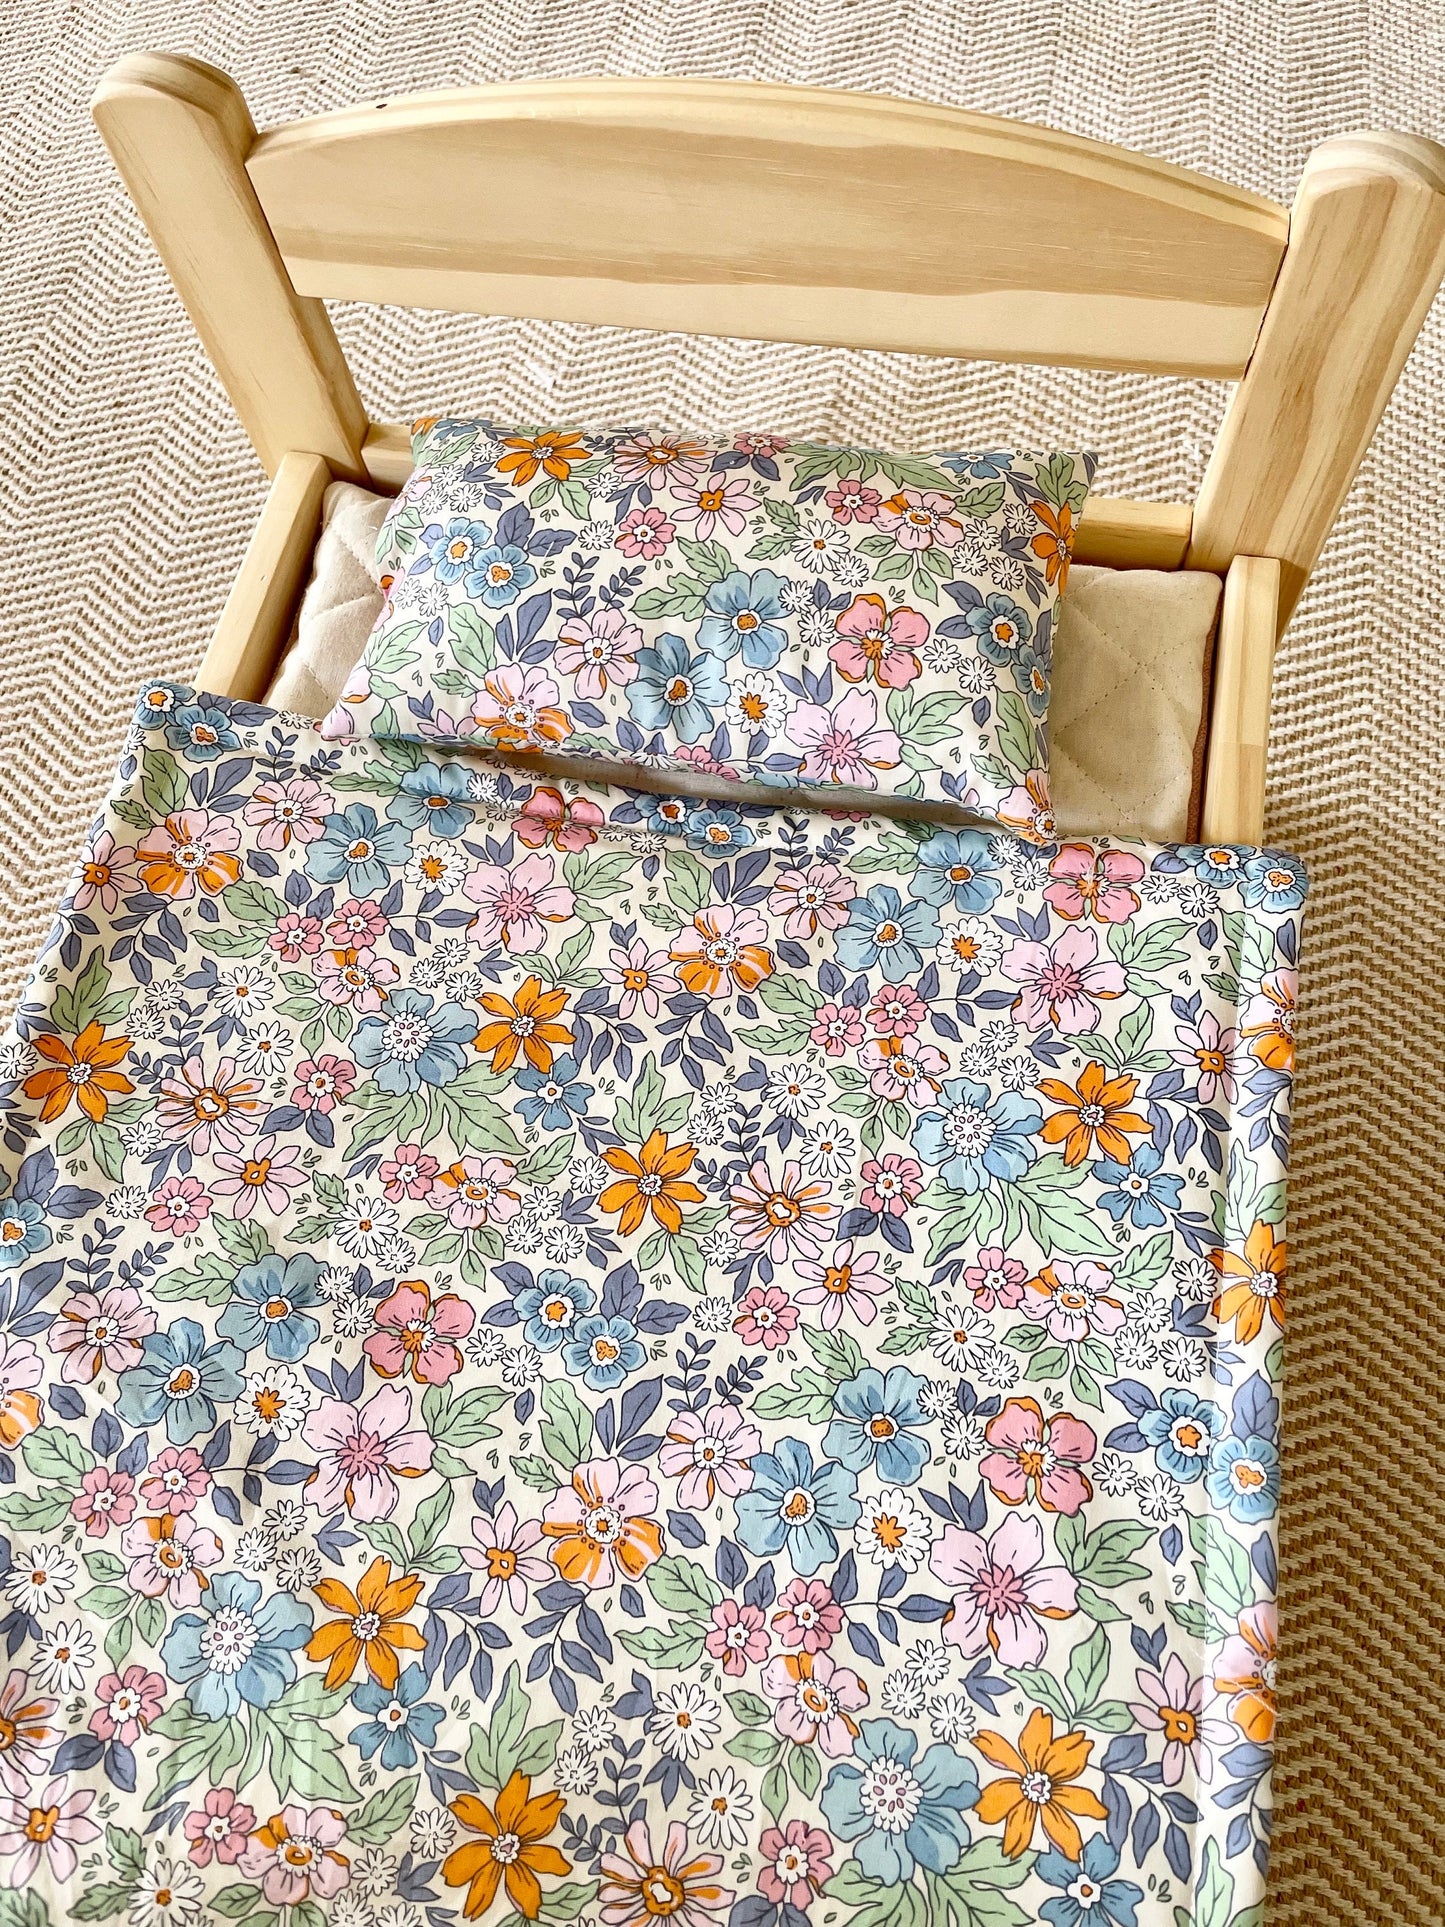 Flower Doll Bedding | Gift for niece | Crib sheet and pillow toy set | Doll Bed Cover Linen | Doll Cot Blanket | Crib Bedding | Pram Pillows